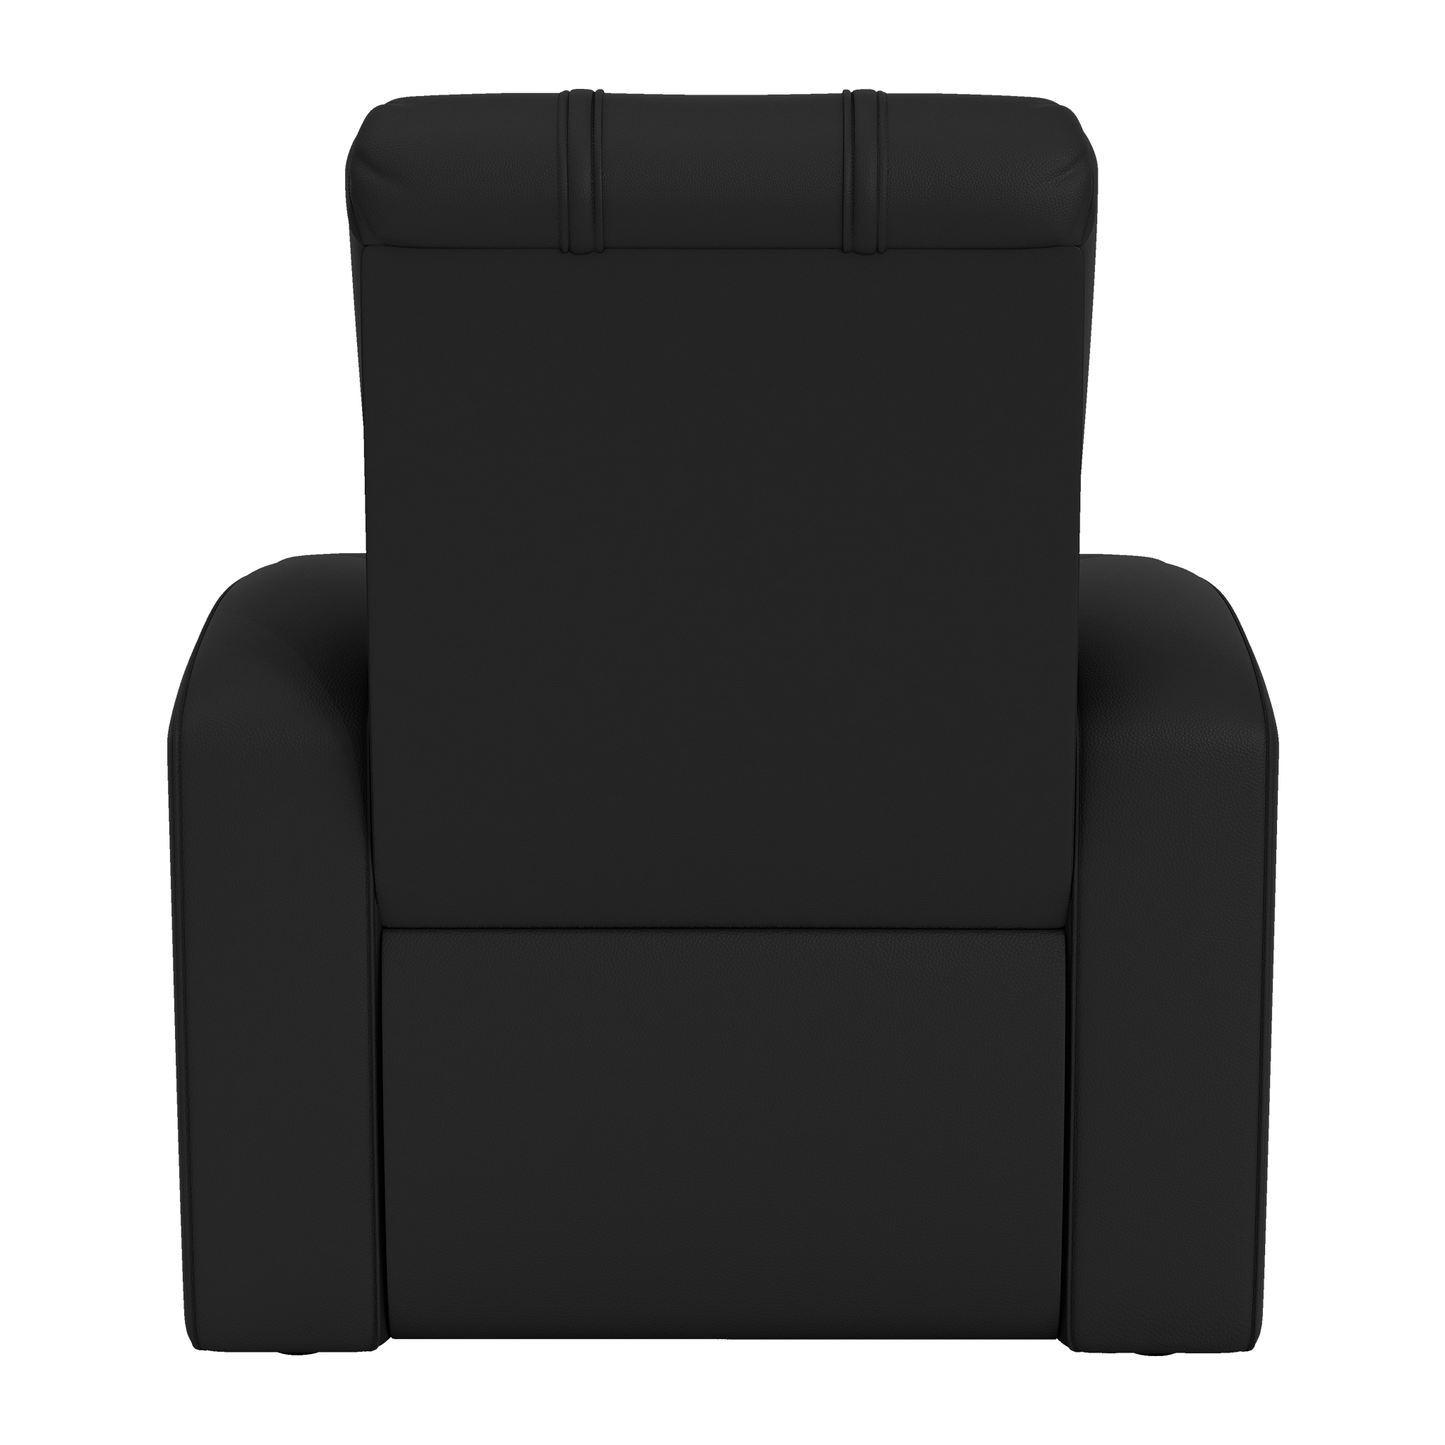 Relax Home Theater Recliner with Miami Marlins Primary Logo Panel